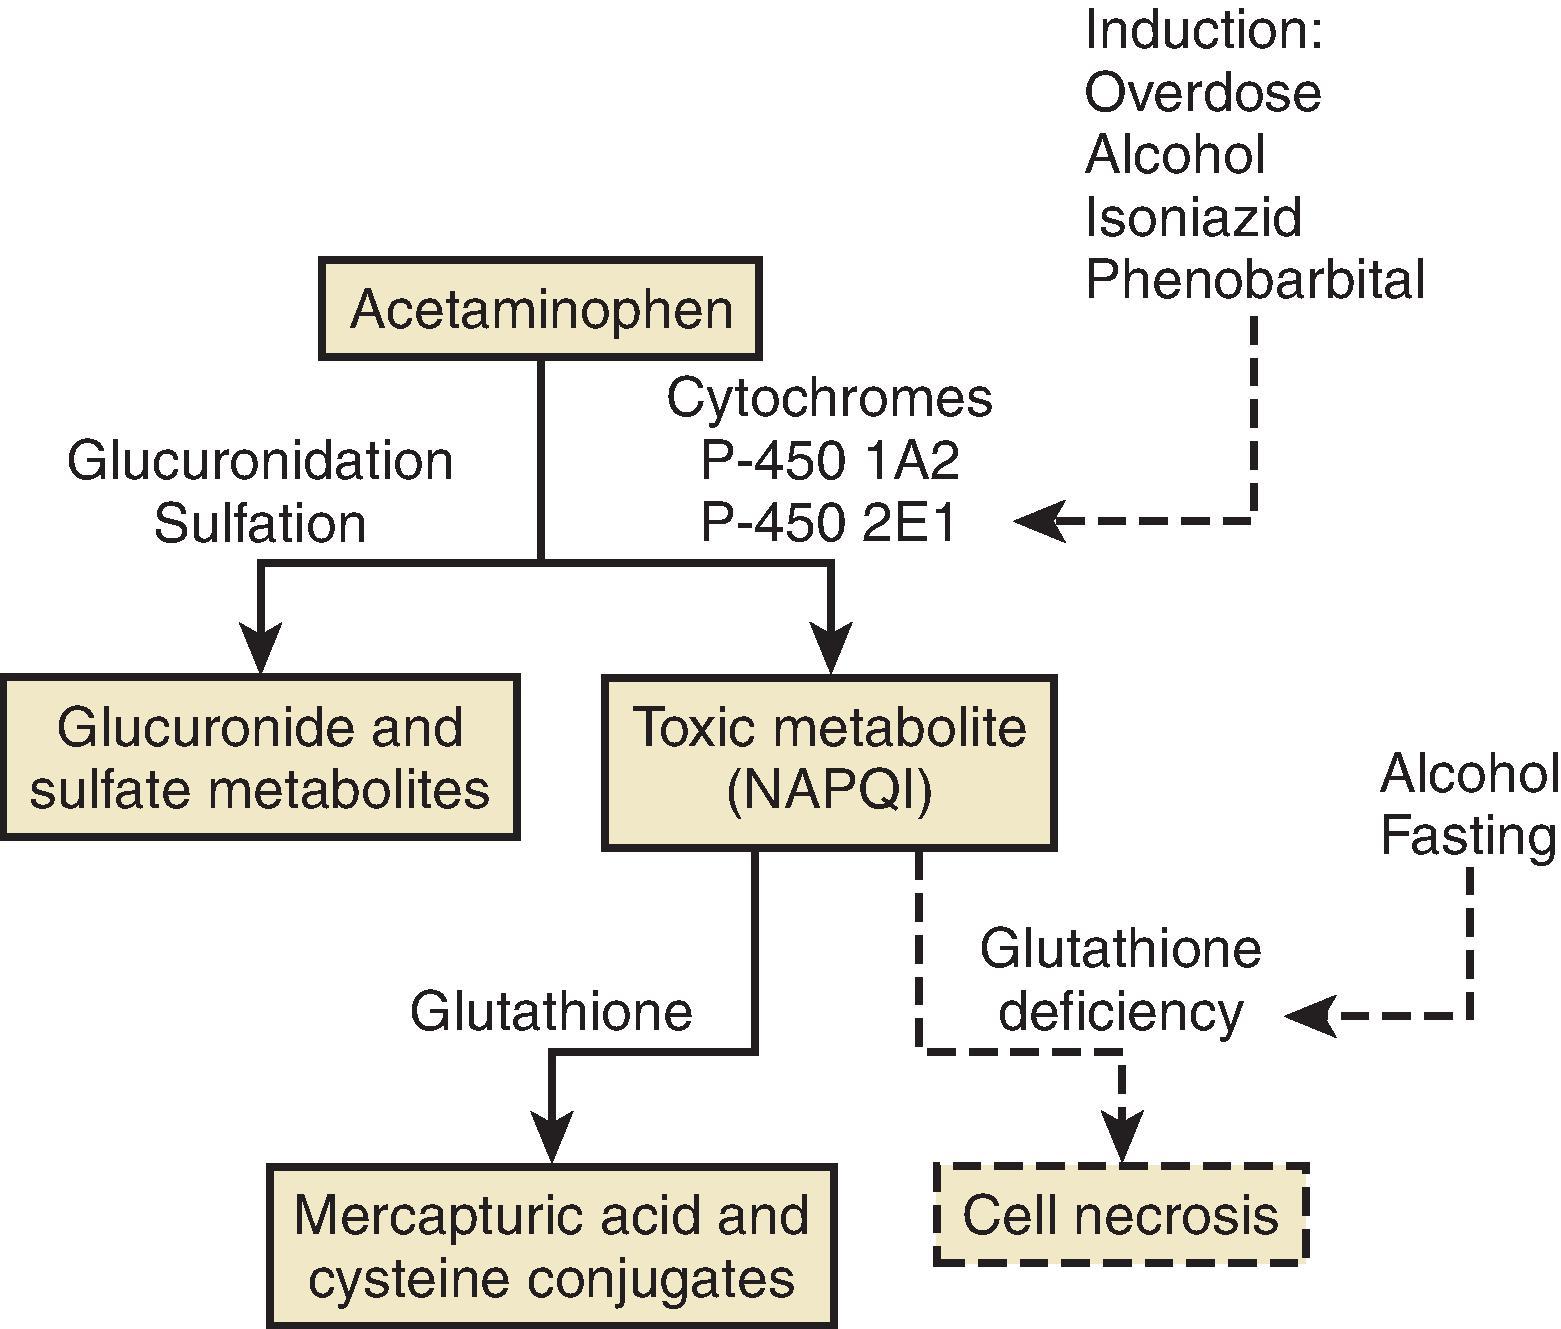 Figure 49.3, Metabolism of acetaminophen. NAPQI, N -acetyl- p -benzoquinoneimine. (From Barkin RL. Acetaminophen, aspirin, or ibuprofen in combination analgesic products. Am J Ther . 2001;8:433-442.)